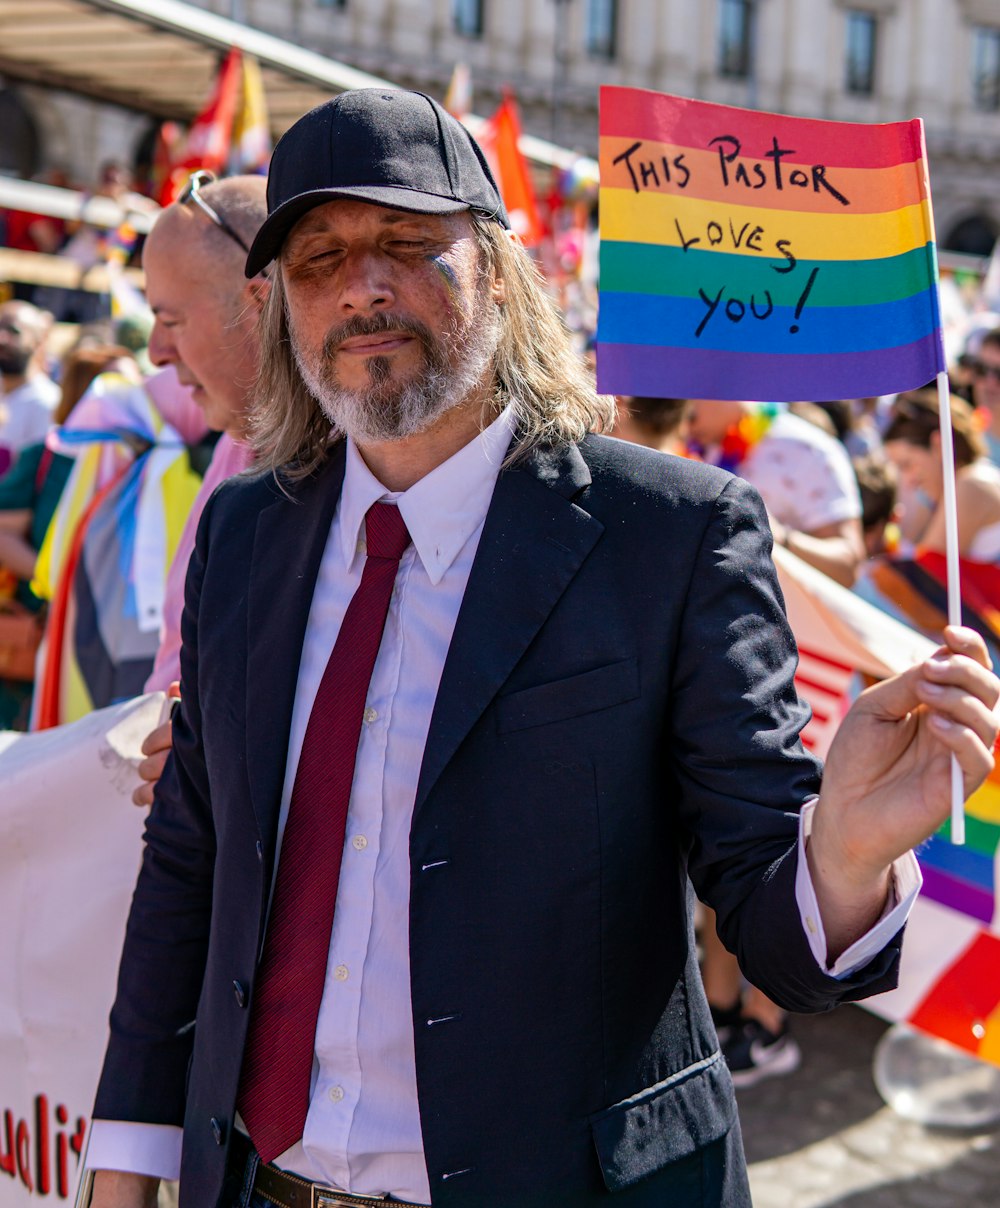 a man in a suit and tie holding a rainbow flag